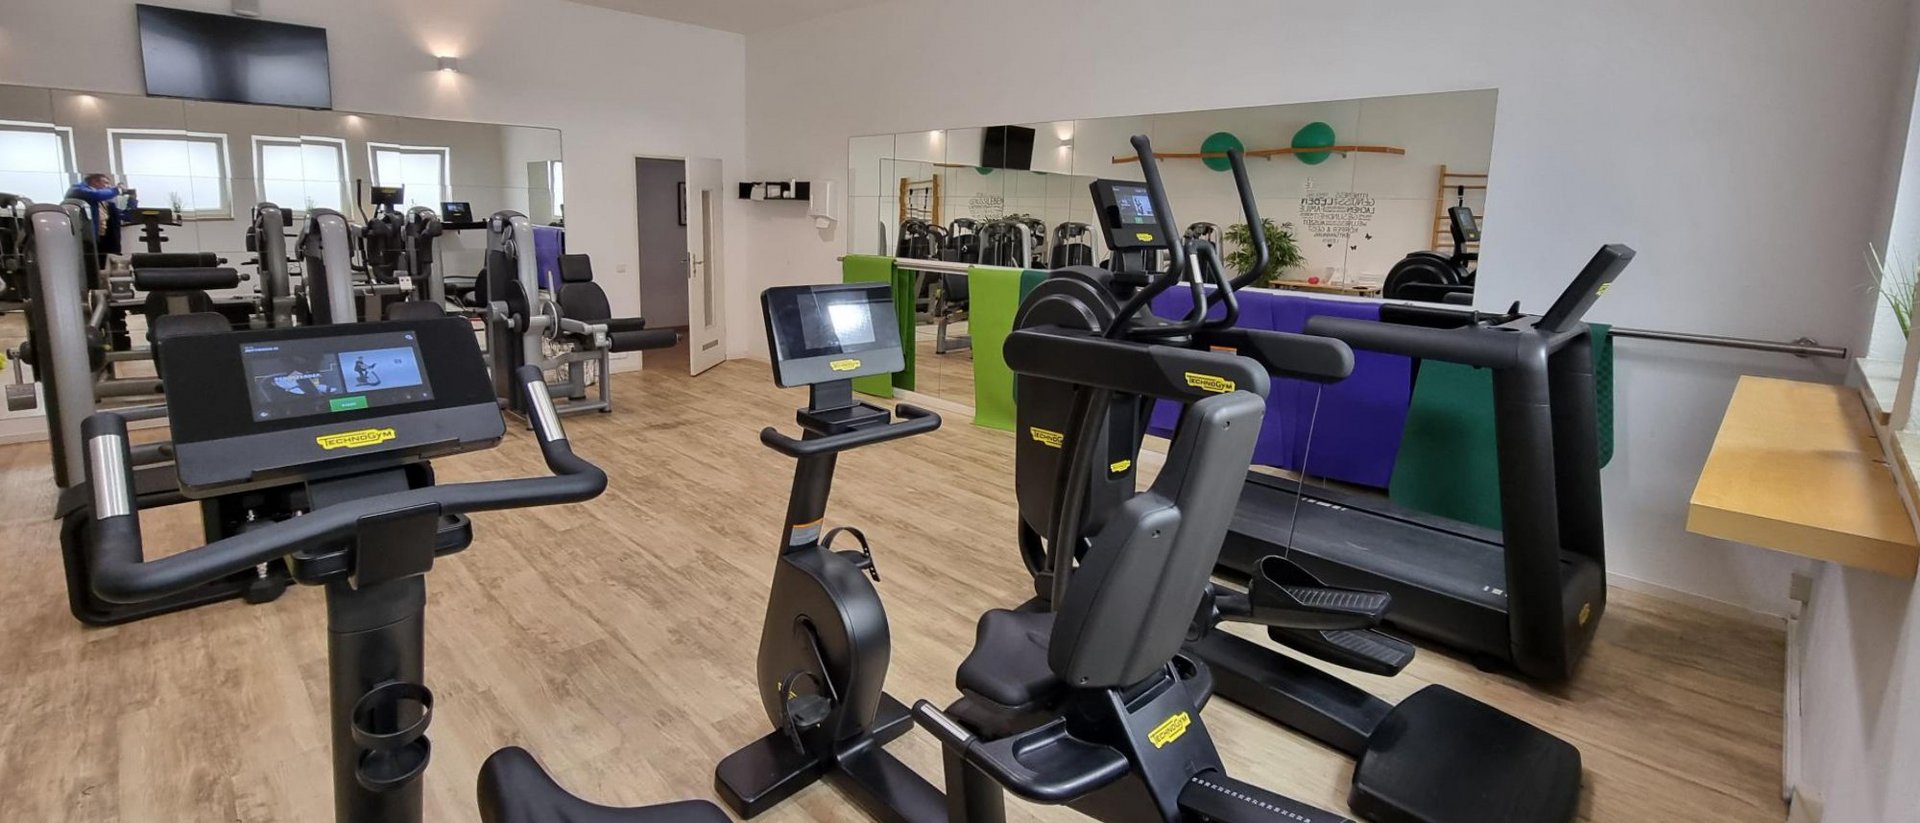 Training on vacation: our fitness room